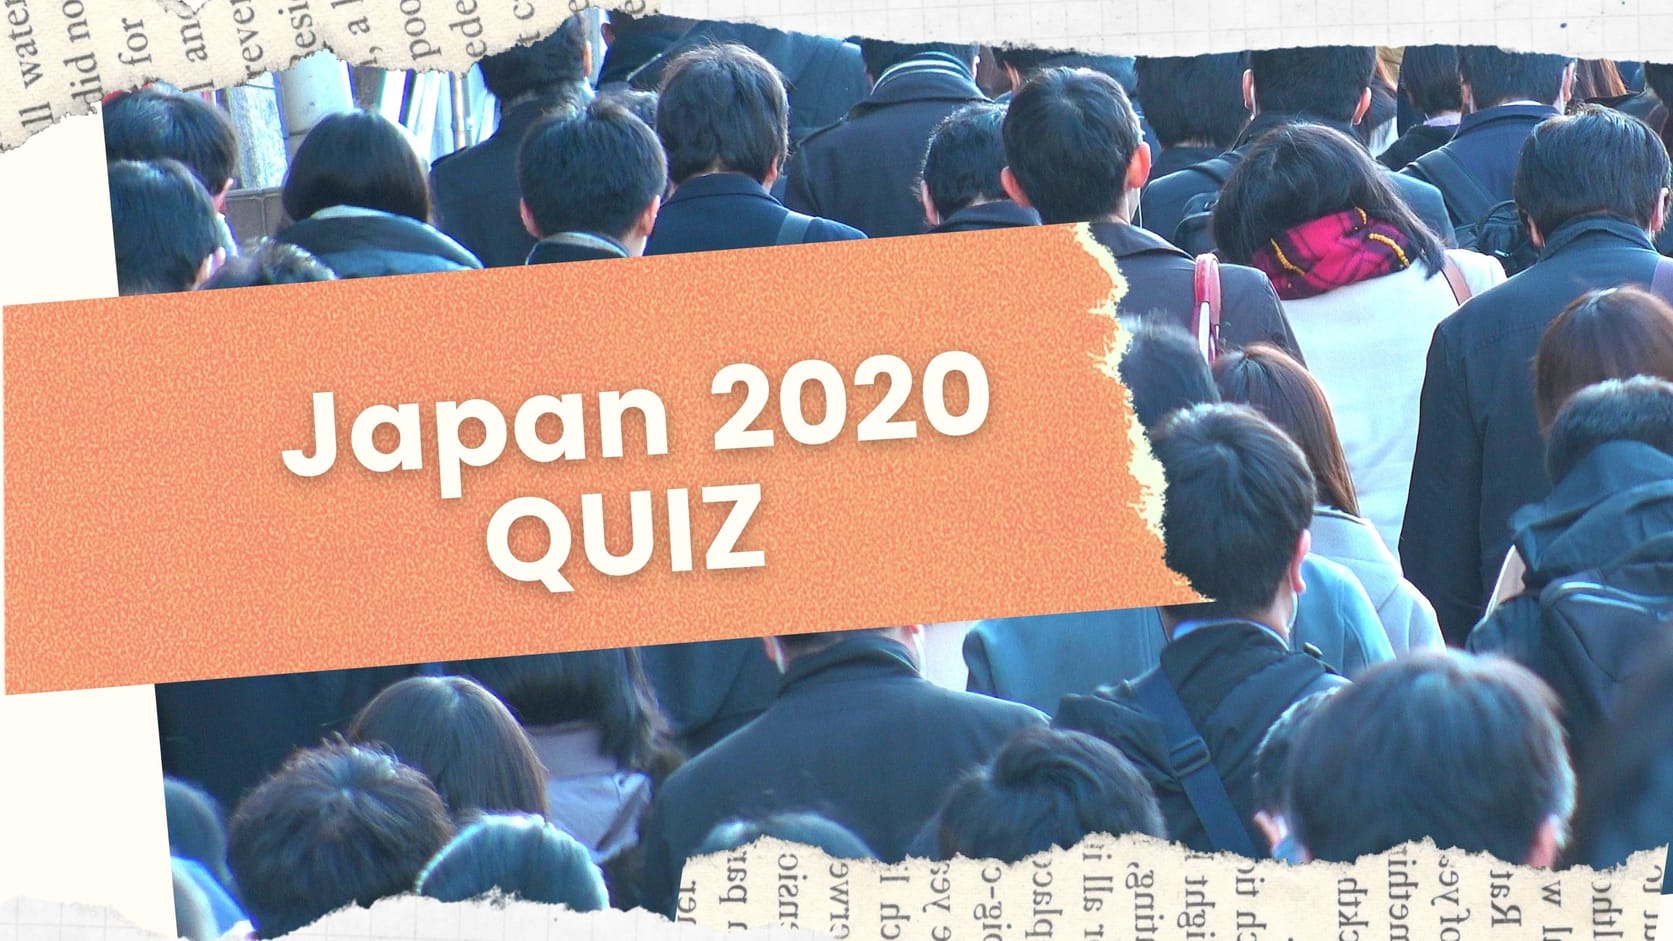 How Well Did You Follow Japan’s News This Year? Take This 2020 Quiz to Find Out!